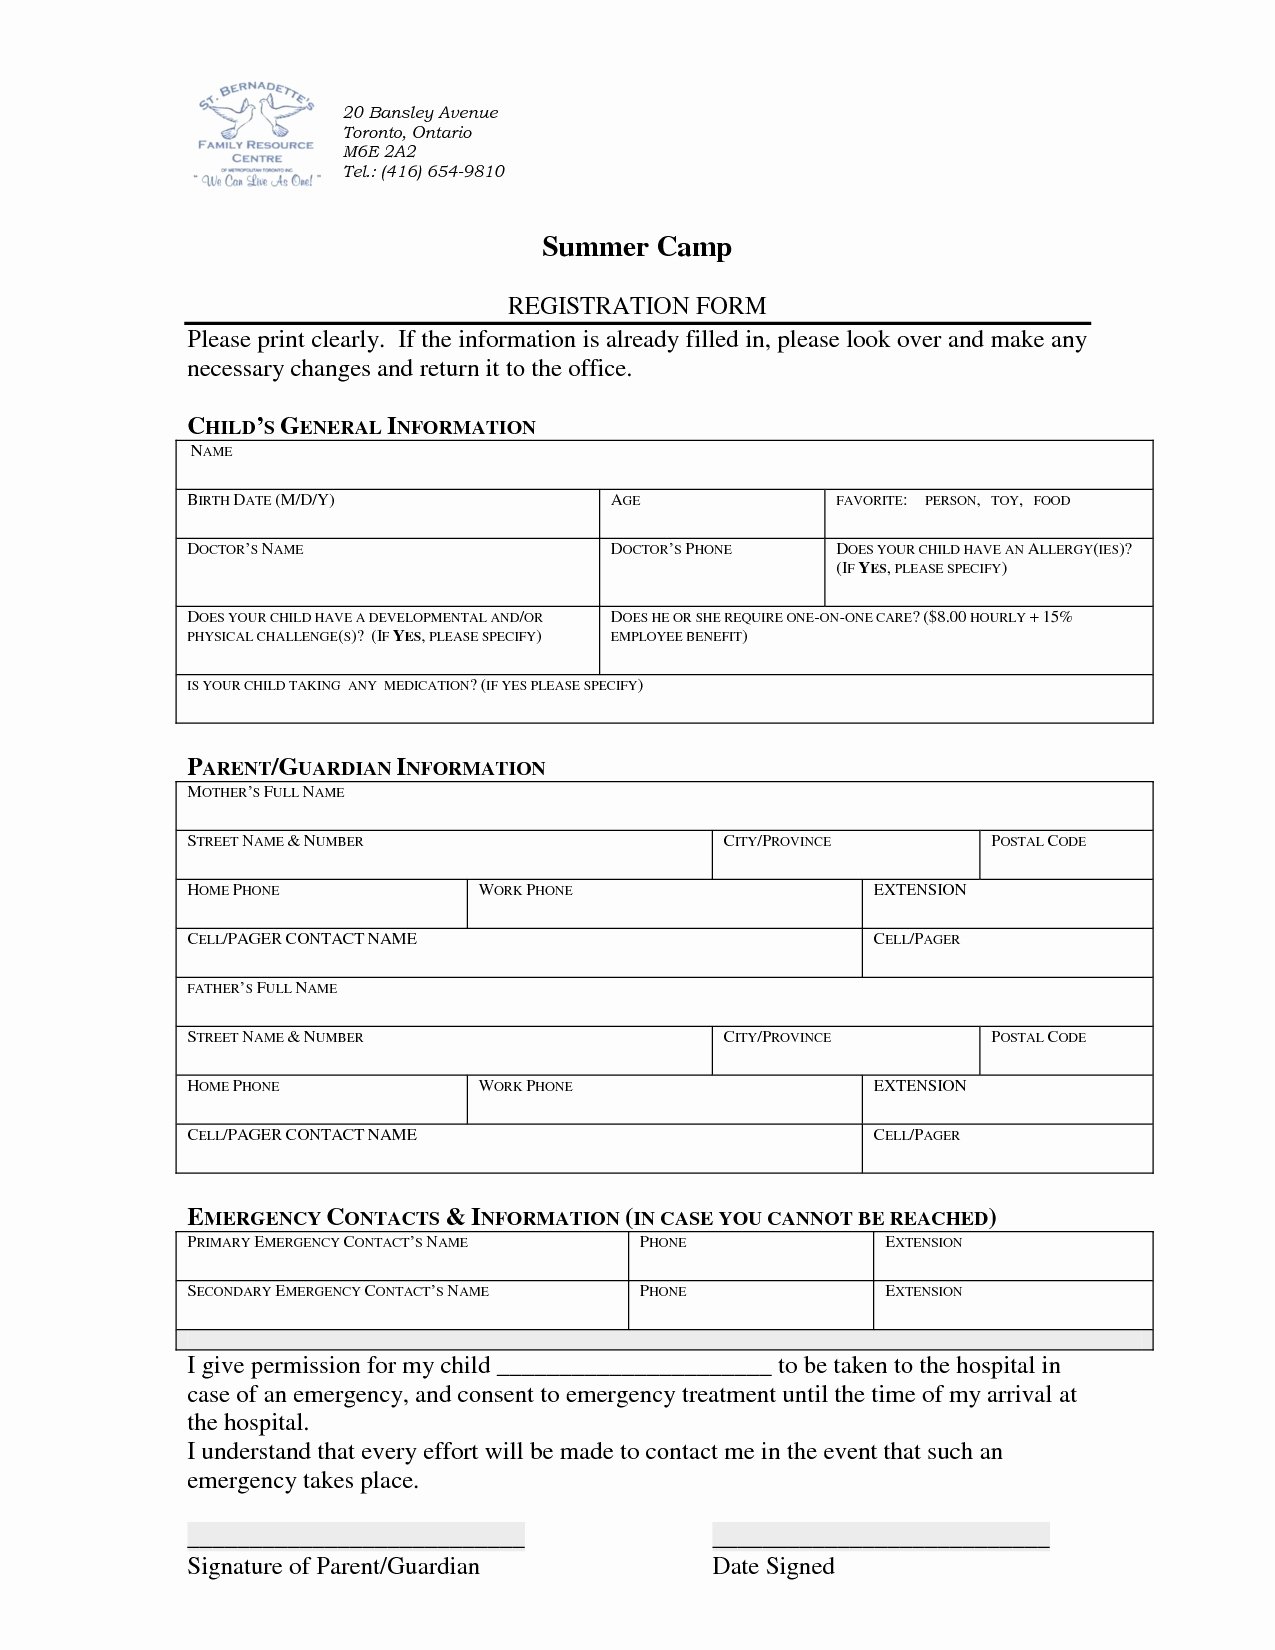 School Registration forms Template Luxury Best form Template Download Proshredelite Page 293 Of